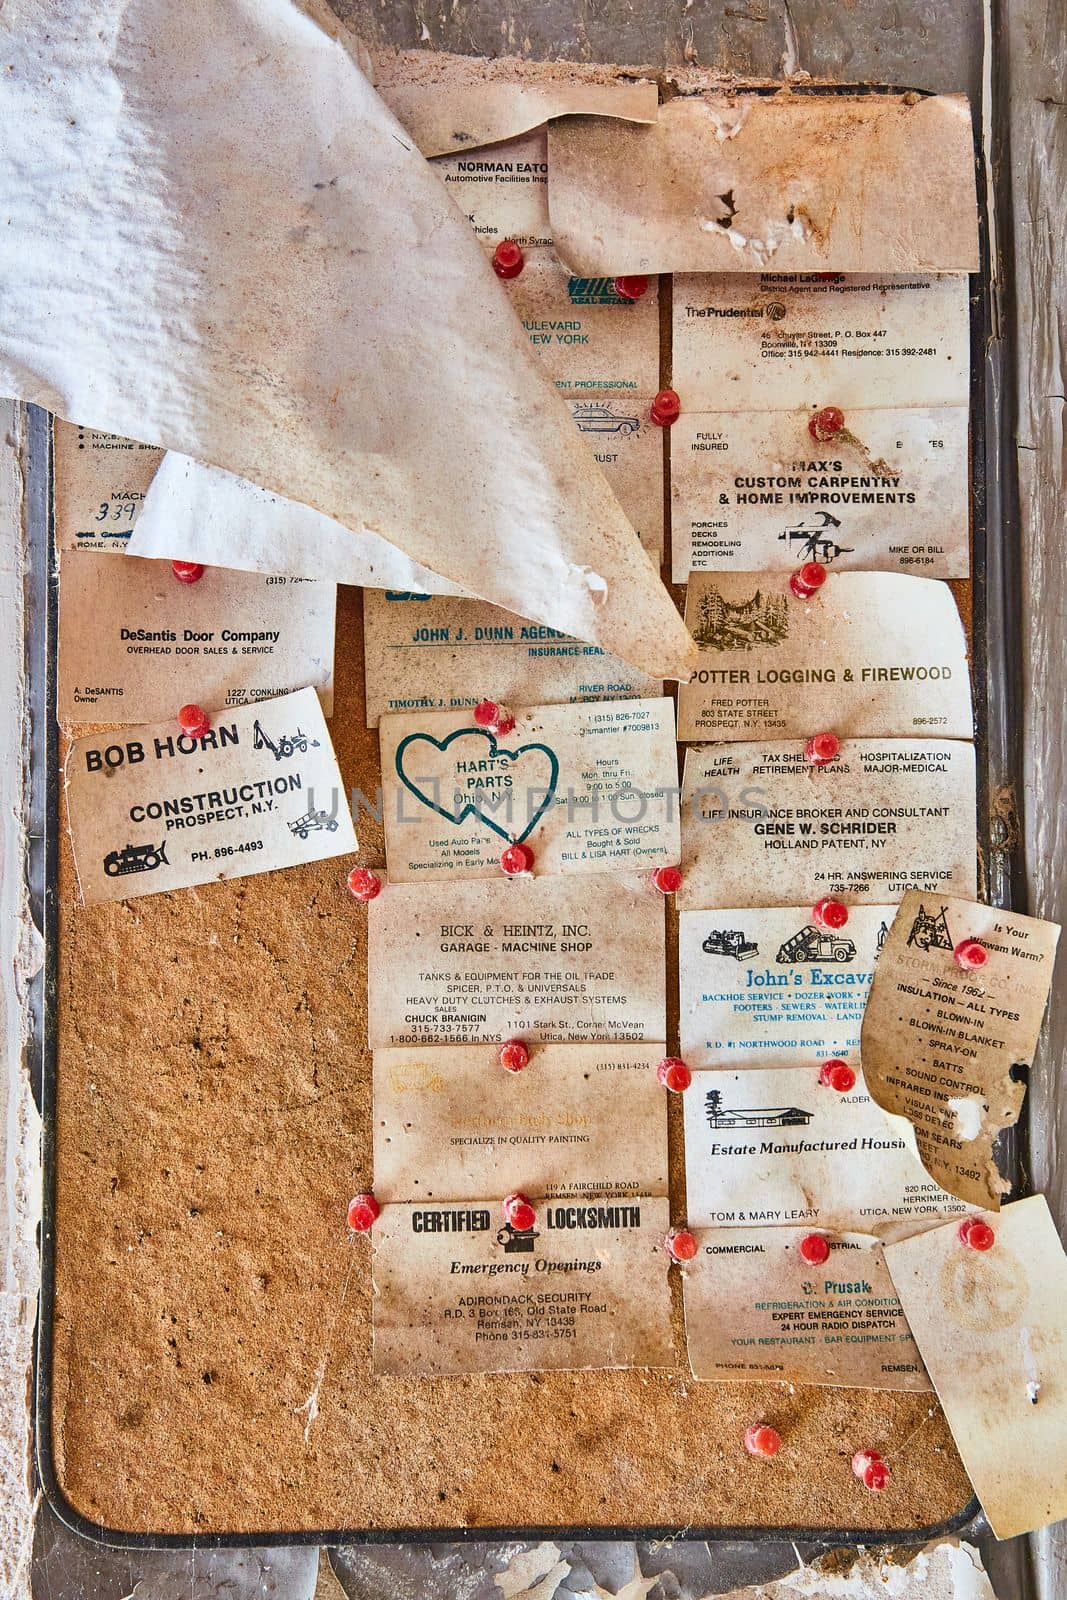 Image of Abandoned cork board covered with old business cards pinned